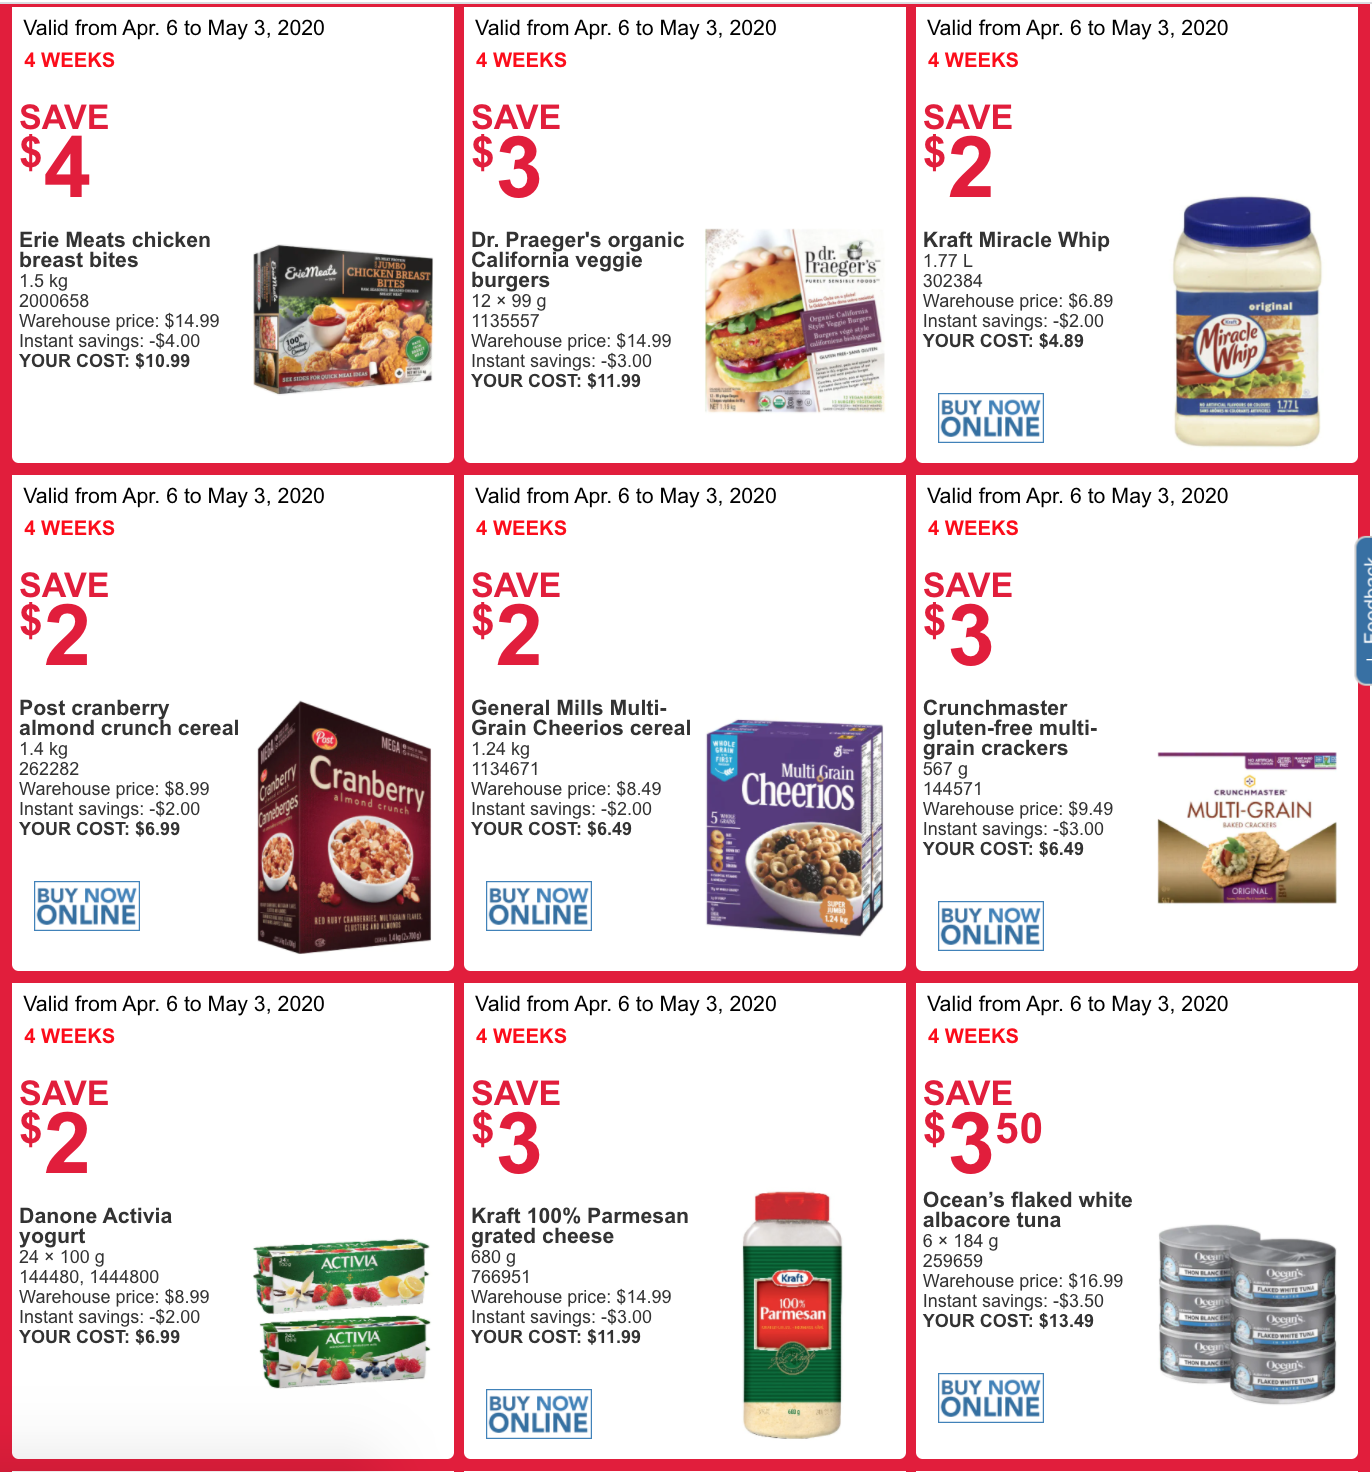 Costco Canada Weekly More Savings Coupons/Flyers for Quebec, April 6